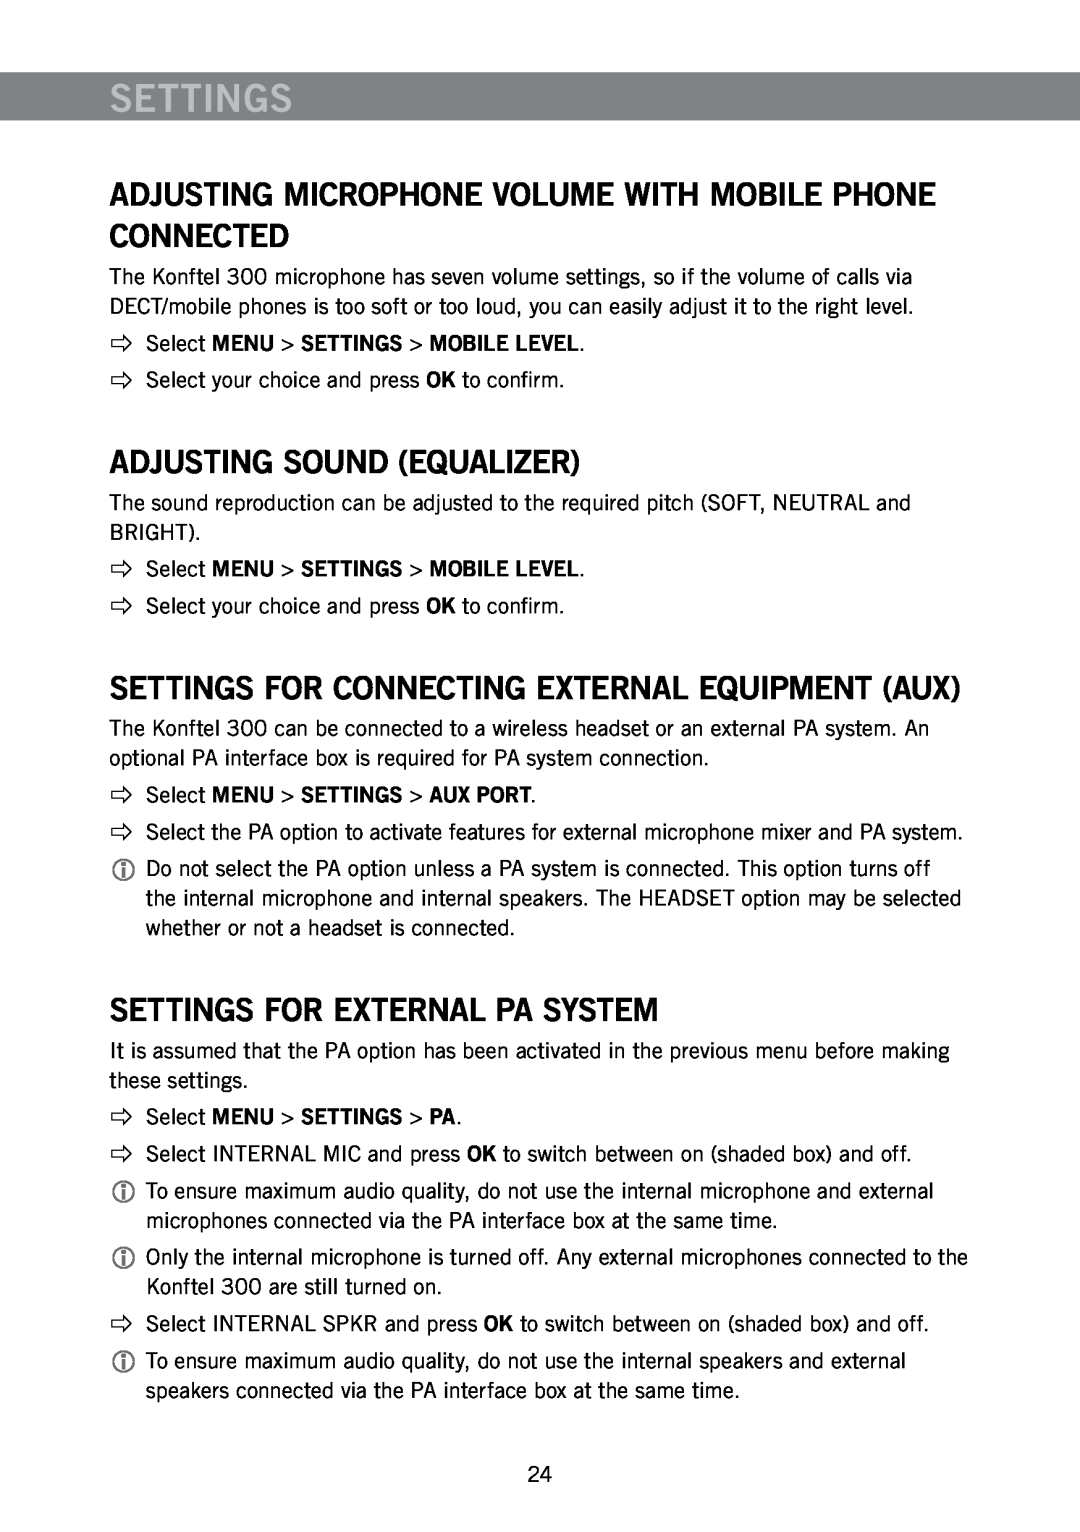 Konftel 300 Adjusting Sound Equalizer, Settings For Connecting External Equipment Aux, Settings For External Pa System 